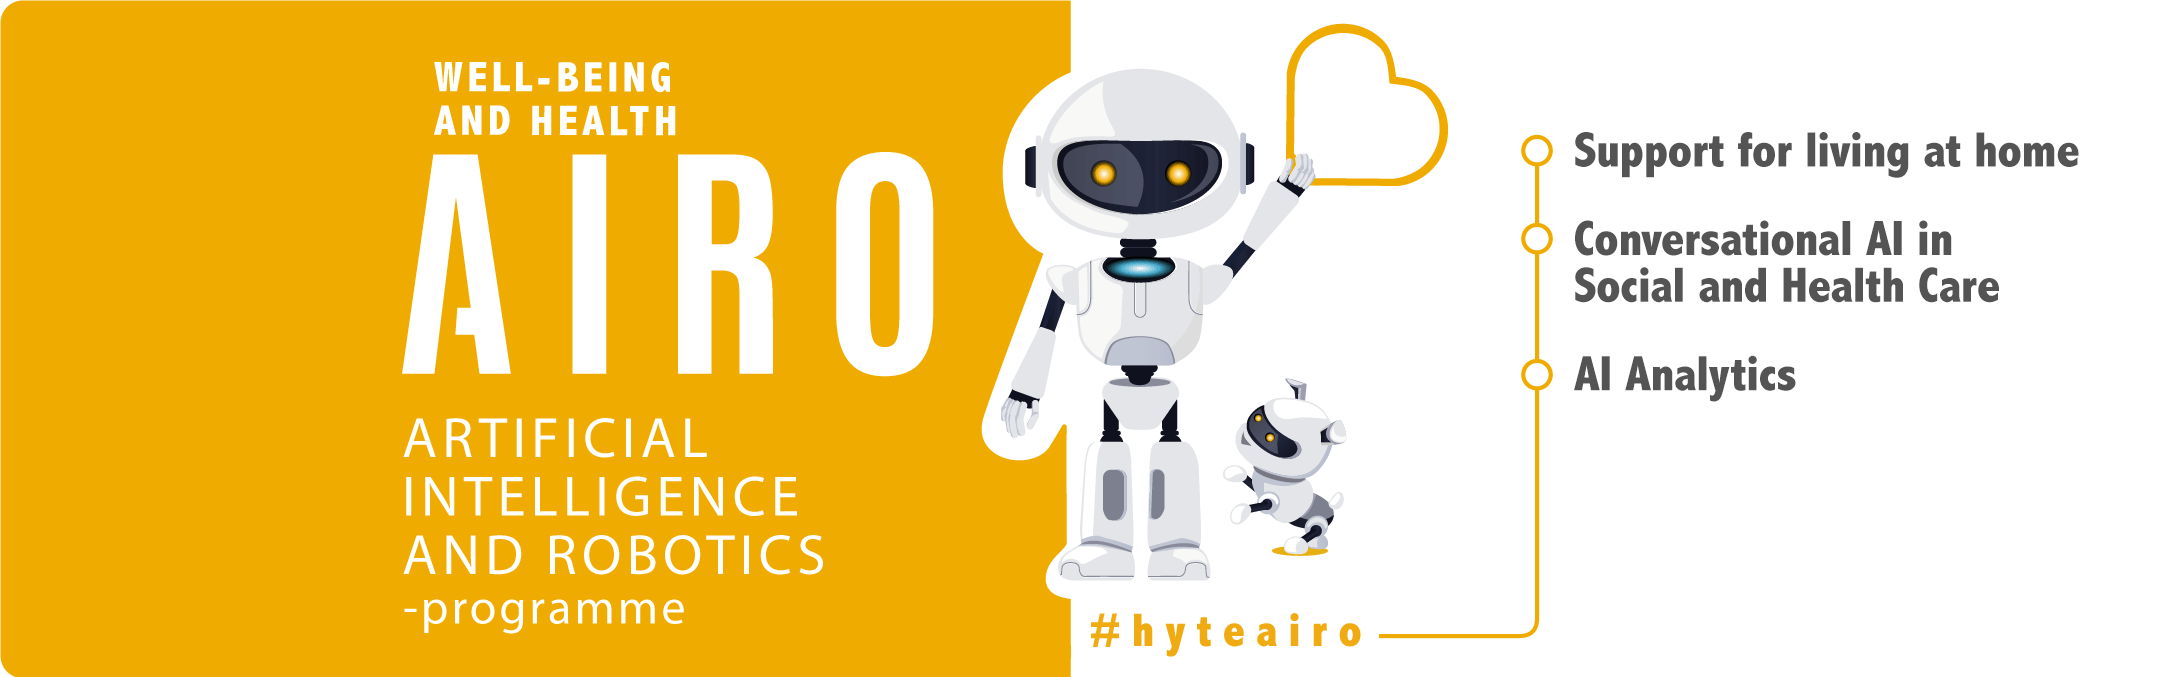 The Well-being and Health Sector’s Artificial Intelligence and Robotics Programme (Hyteairo): Support for living at home, Conversational AI in Social and Health Care, AI Analytics.